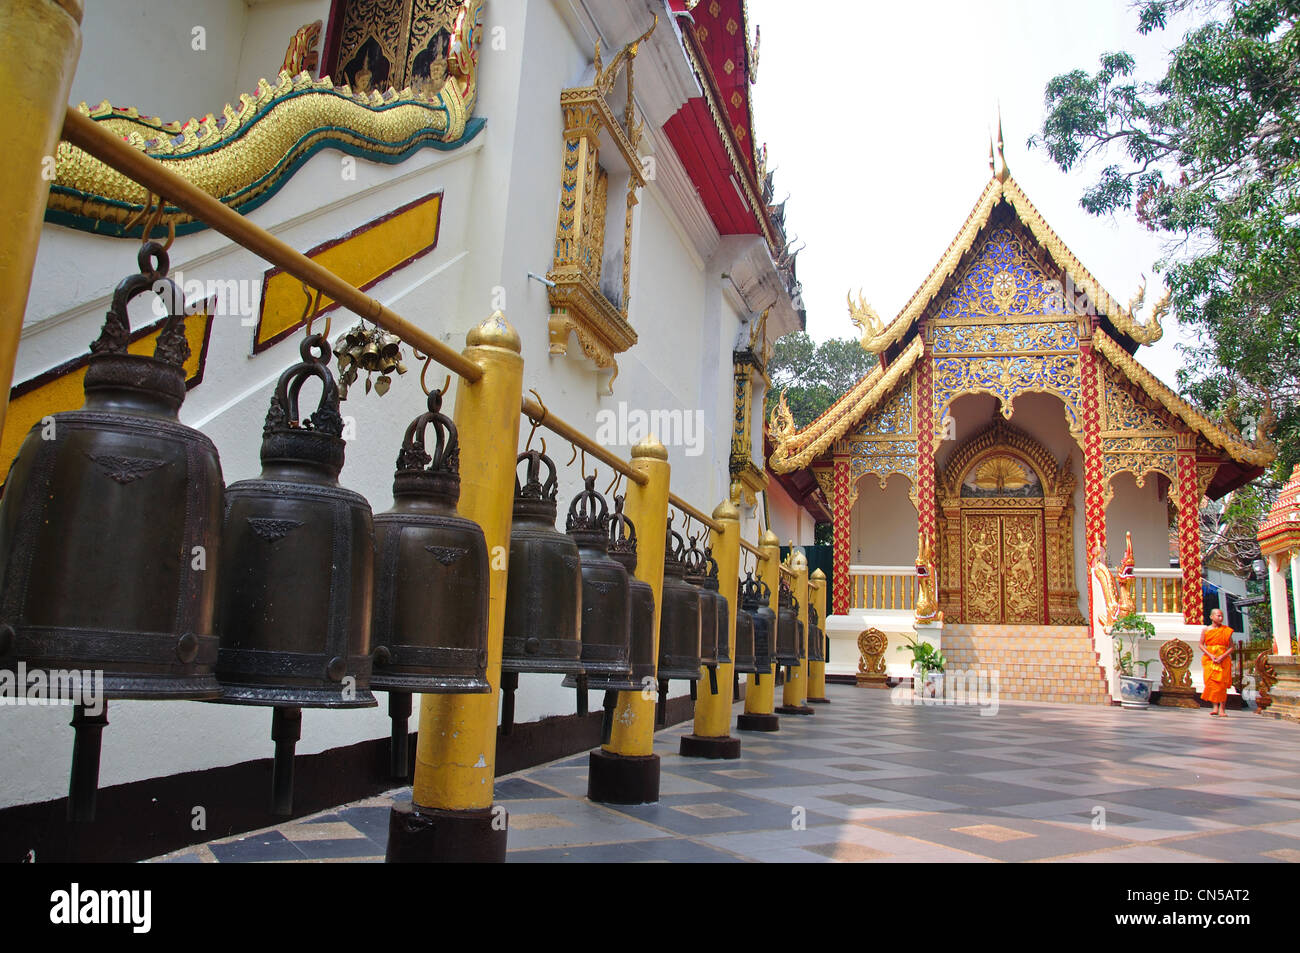 Line of copper gongs at Wat Phrathat Doi Suthep Buddhist temple, Doi Suthep, Chiang Mai, Chiang Mai Province, Thailand Stock Photo